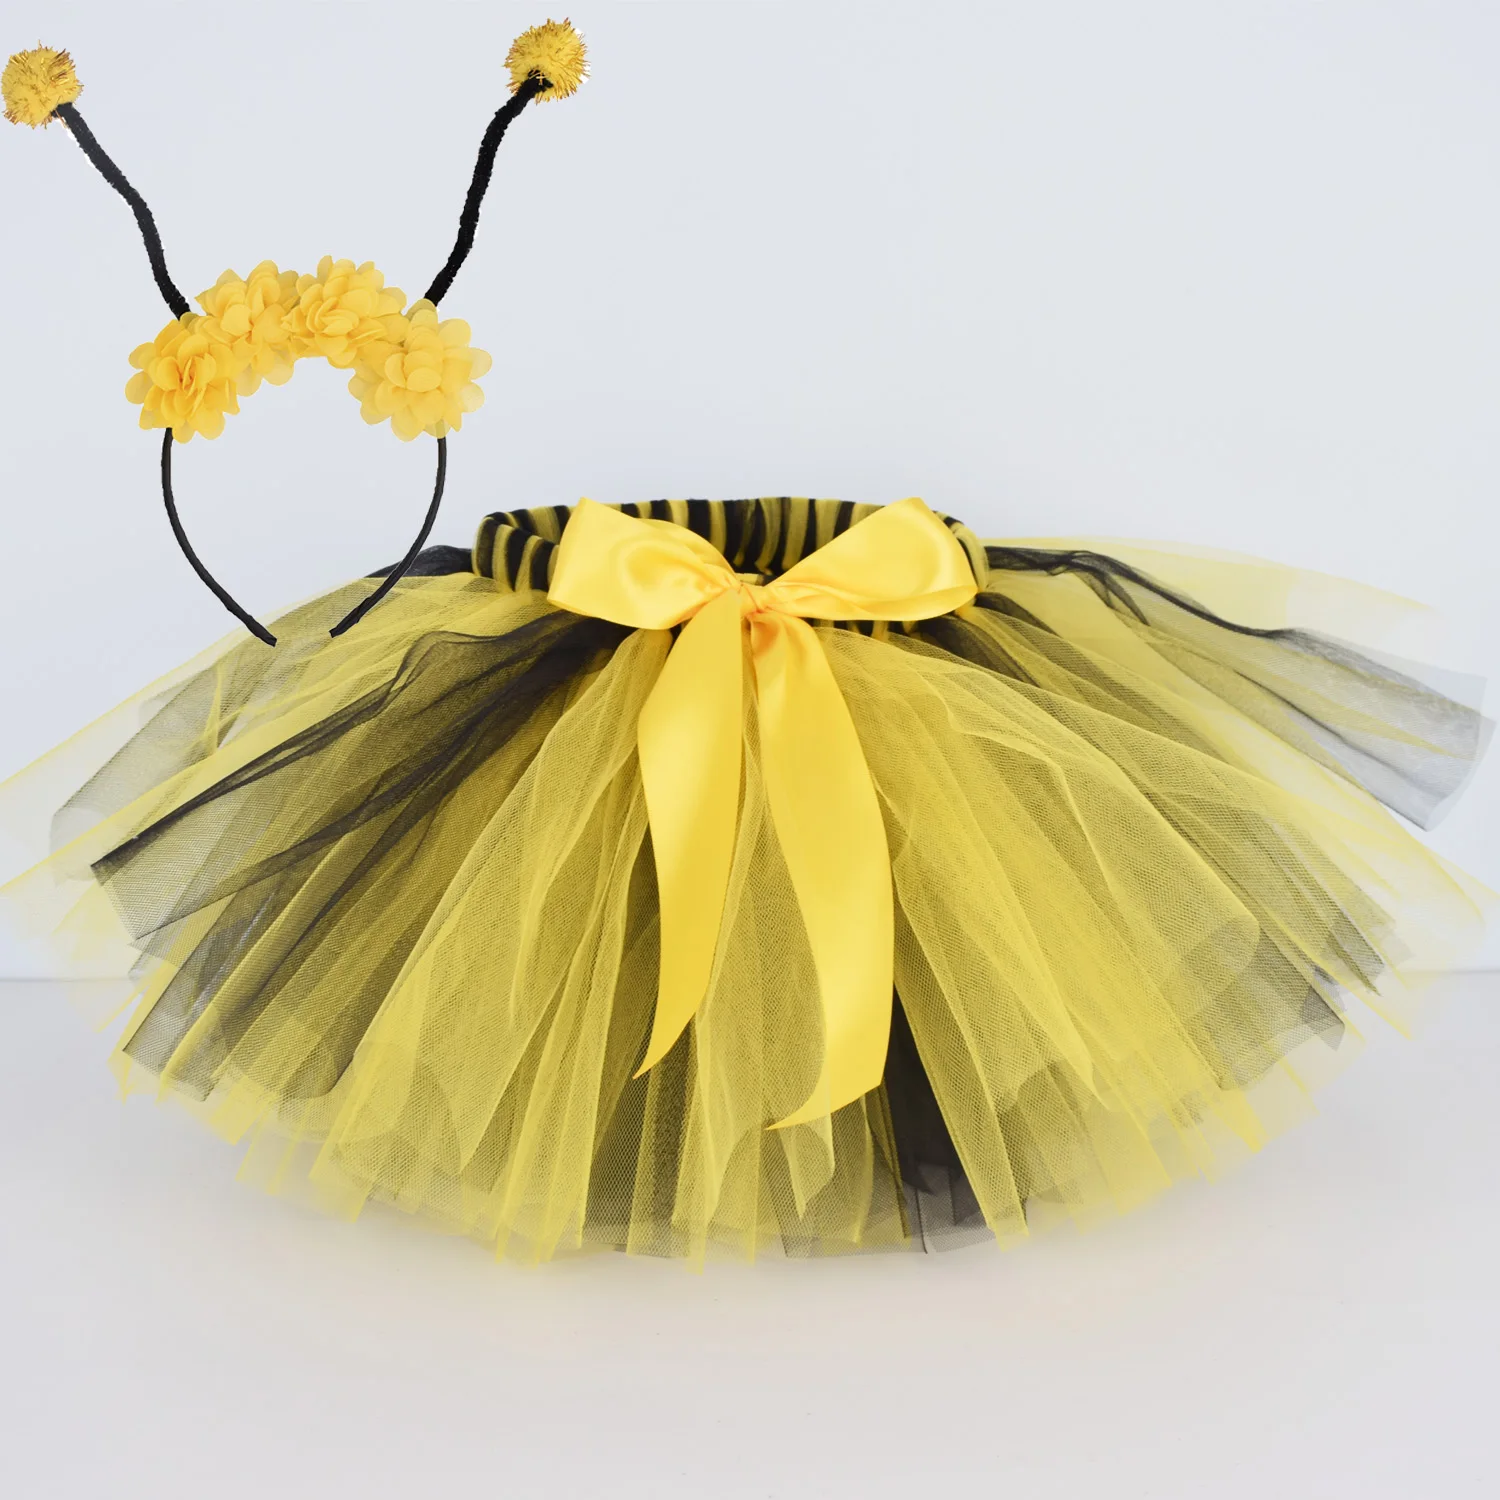 Yellow/Black Fluffy Tutu Skirt Baby Birthday Party Bee Cosplay Costume Dance Ballet Tulle Skirt Newborn Photo Props 0-12Y